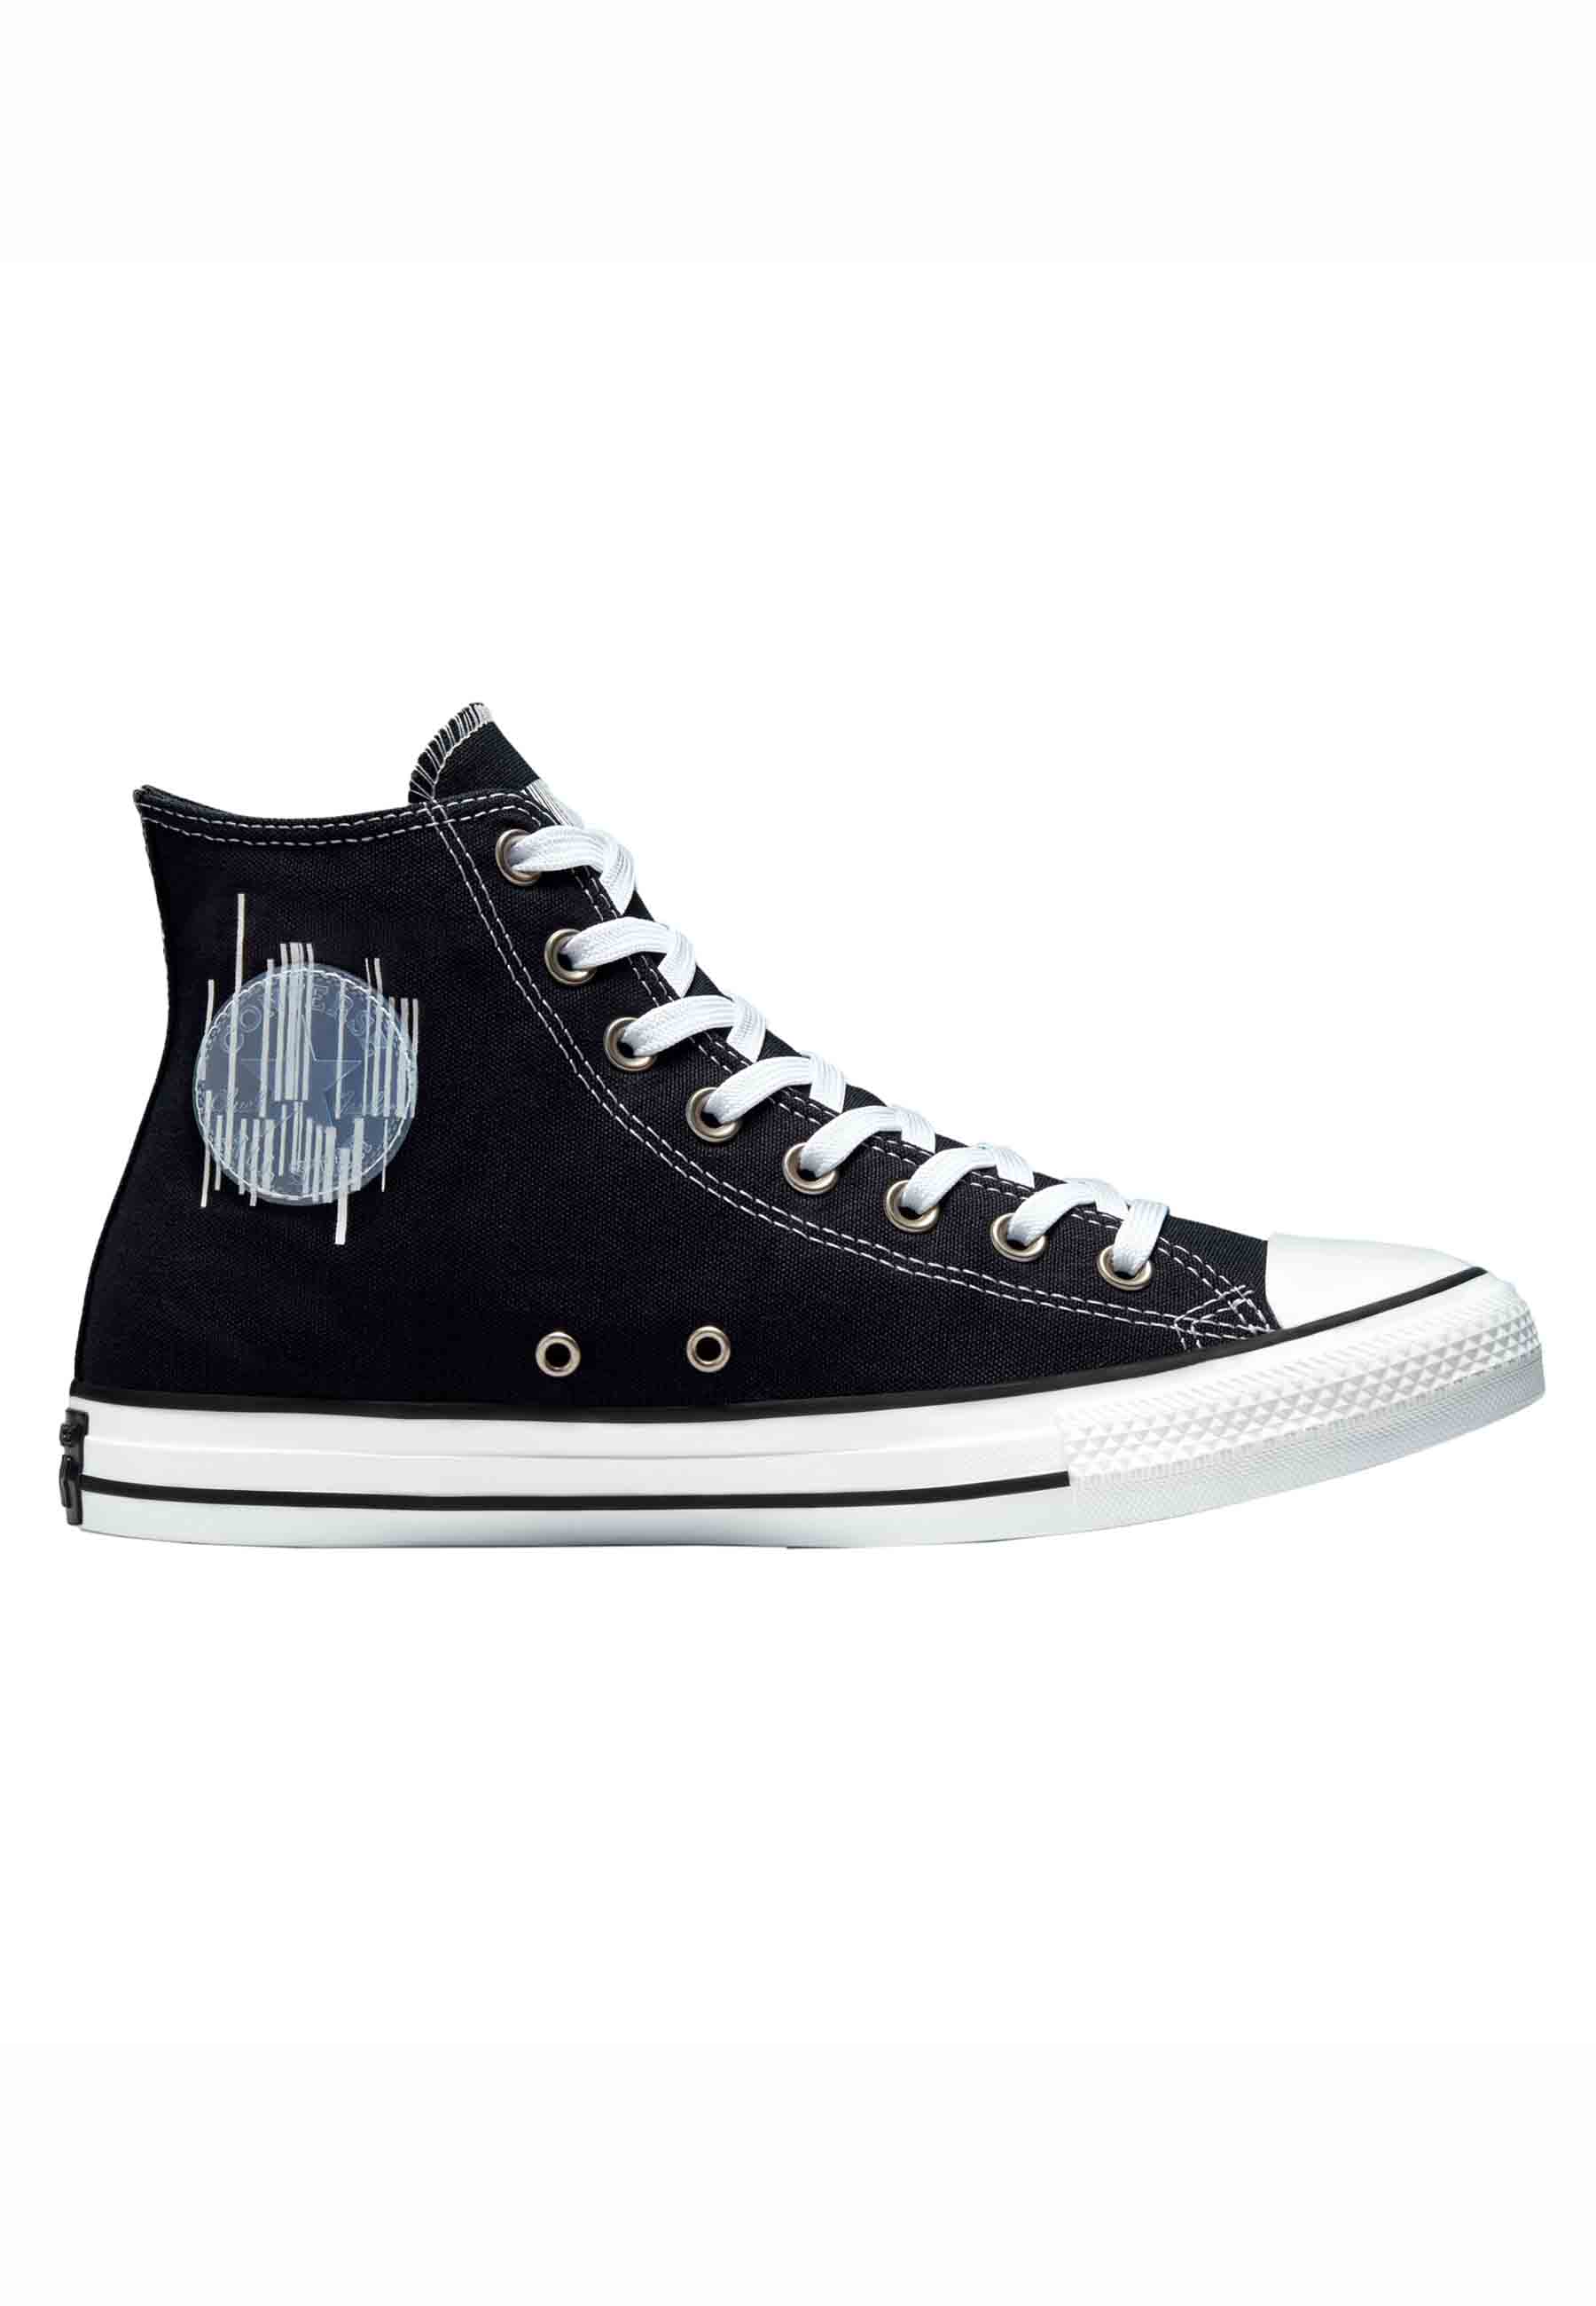 Chuck Taylor Translucent Barcode women's sneakers in black canvas